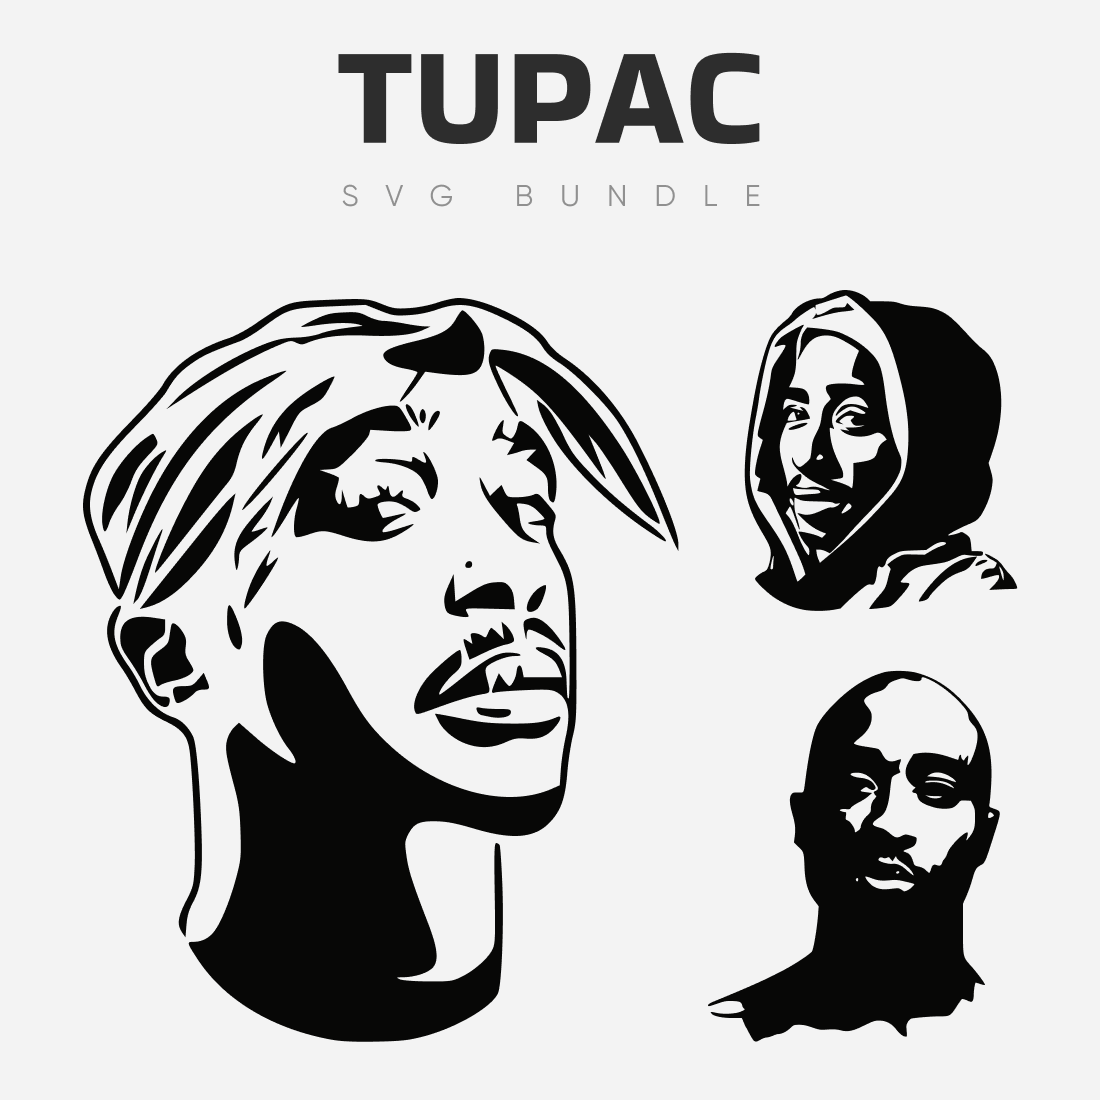 Tupac SVG Bundle, Men with Different Headdresses.